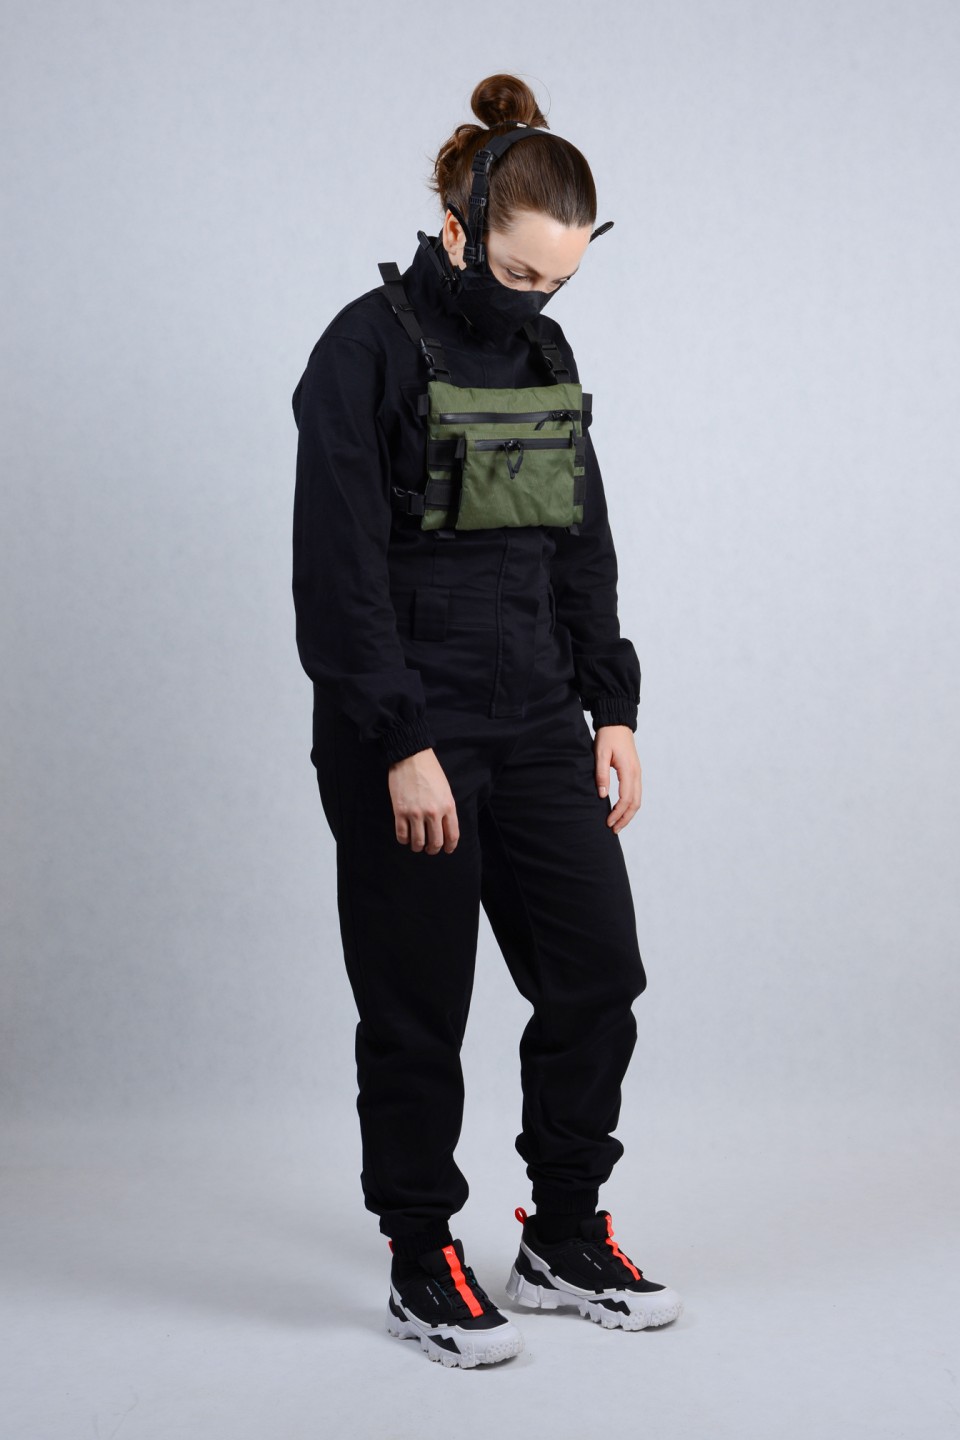 VX21 OLIVE X-PAC CHEST RIG